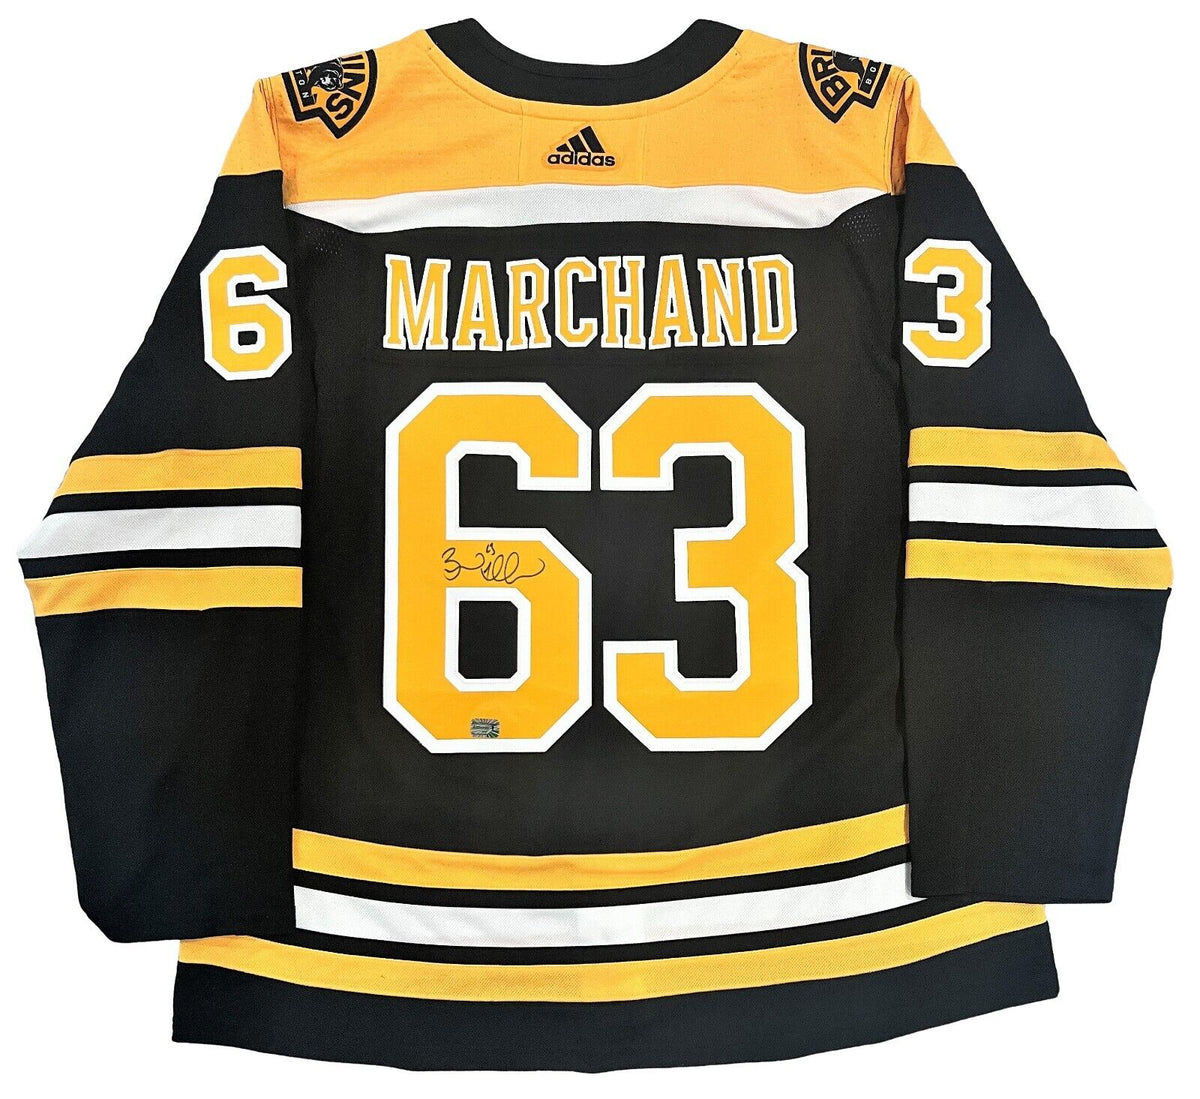 Brad Marchand Boston Bruins Signed Authentic Adidas Home Jersey